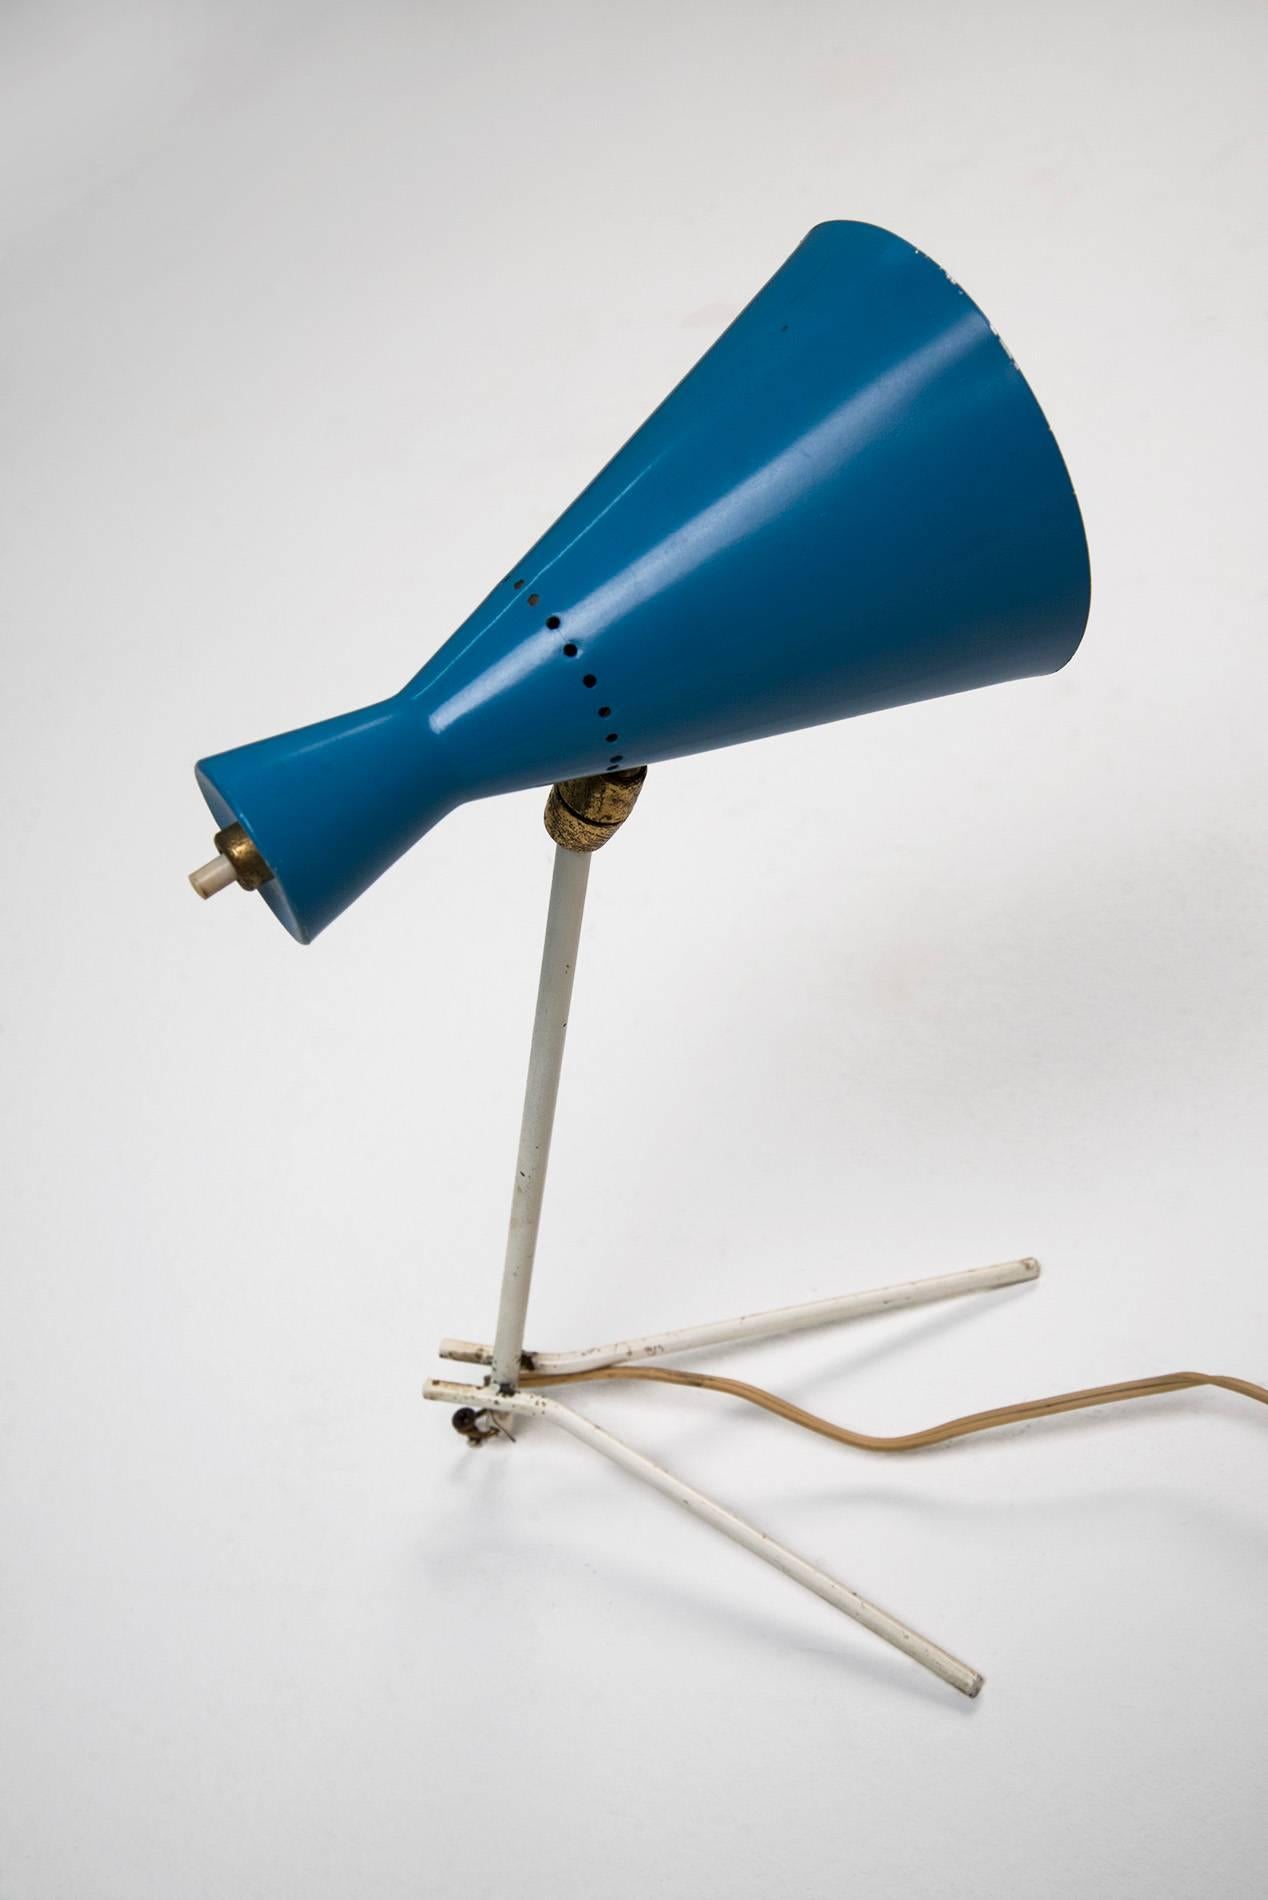 Adjustable table or wall lamp manufactured by Stilnovo, Italy, in the 1950s. Blue and white lacquered metal diffuser, white lacquered metal base, brass joints and switch. Good original vintage conditions.